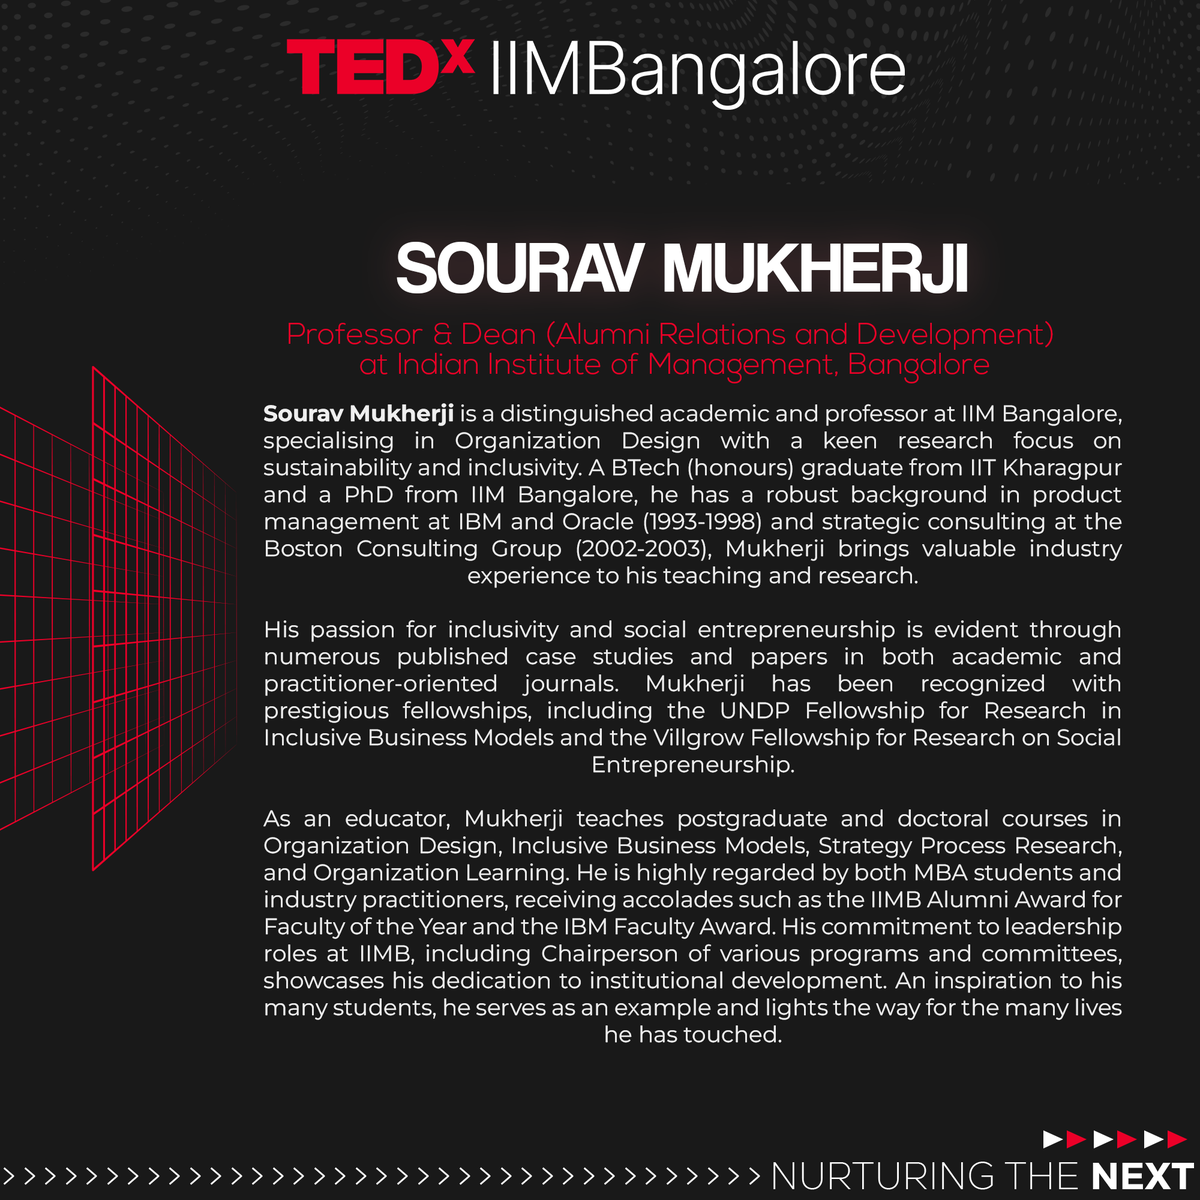 Introducing our next speaker, Sourav Mukherji, a distinguished academic and professor at IIM Bangalore,
specialises in Organization Design with a keen research focus on sustainability and inclusivity. 

#Tedx #speaker #tedxevents